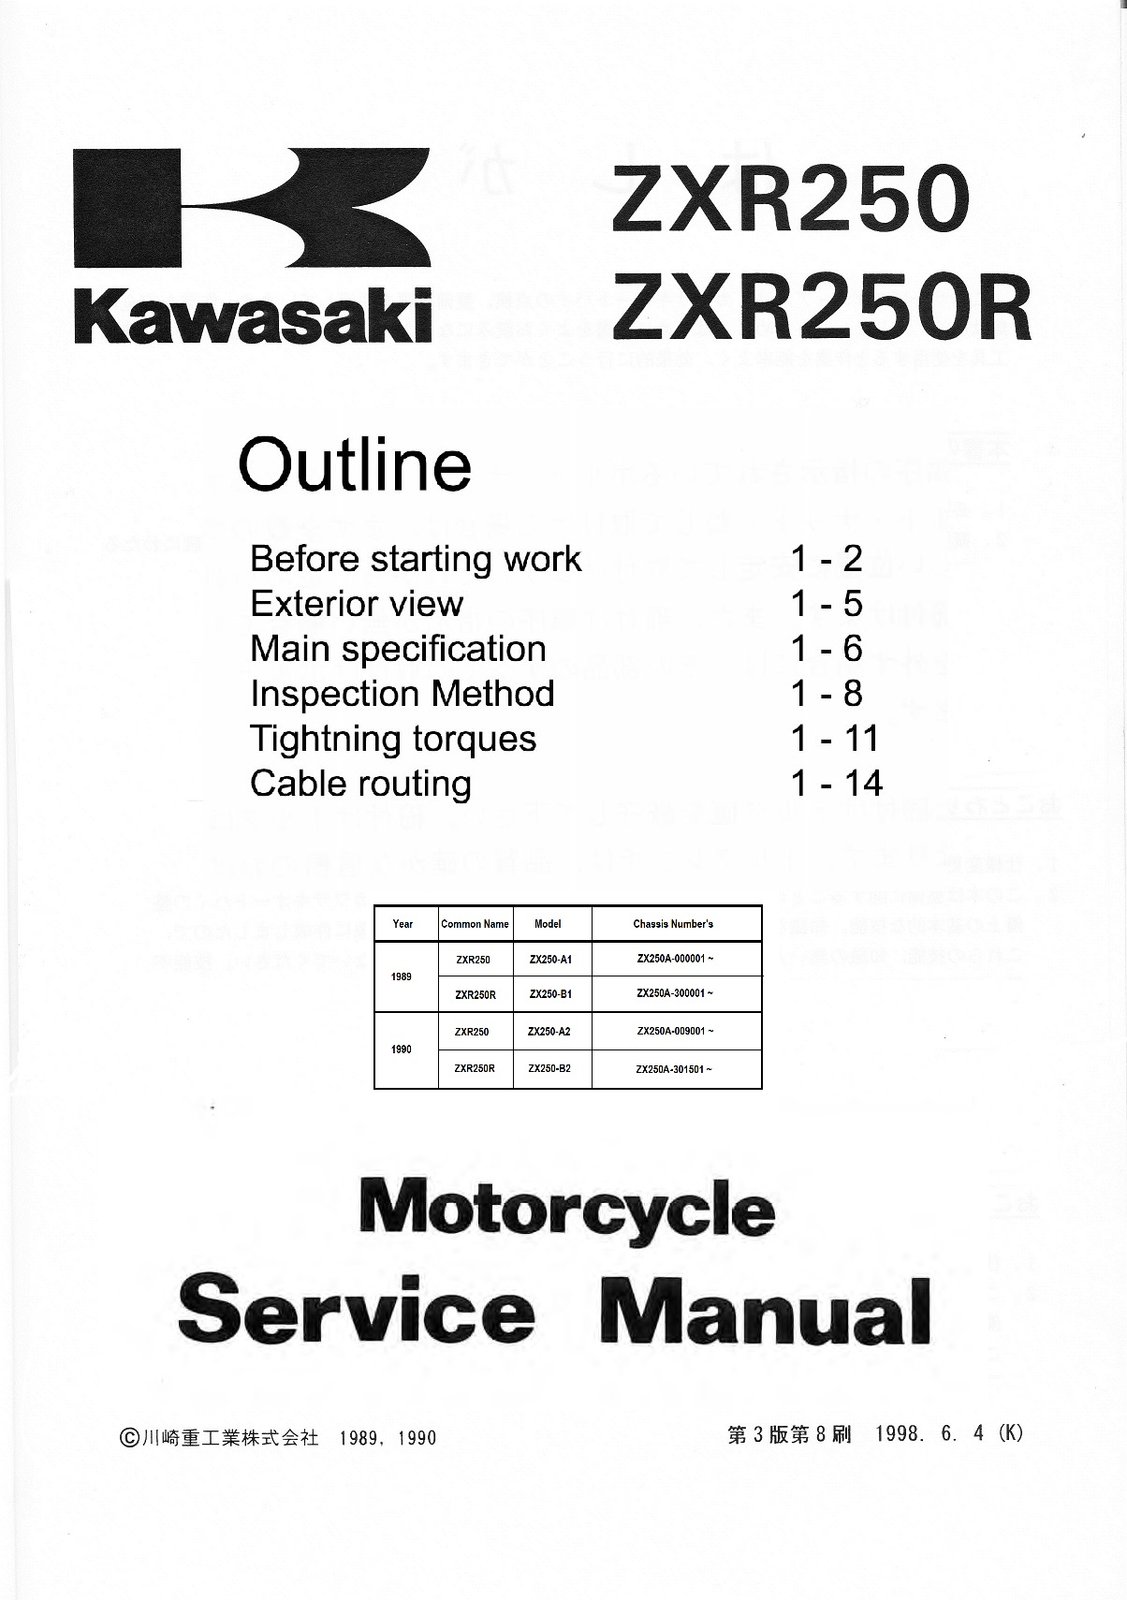 ZXR250A cover section 1.jpg